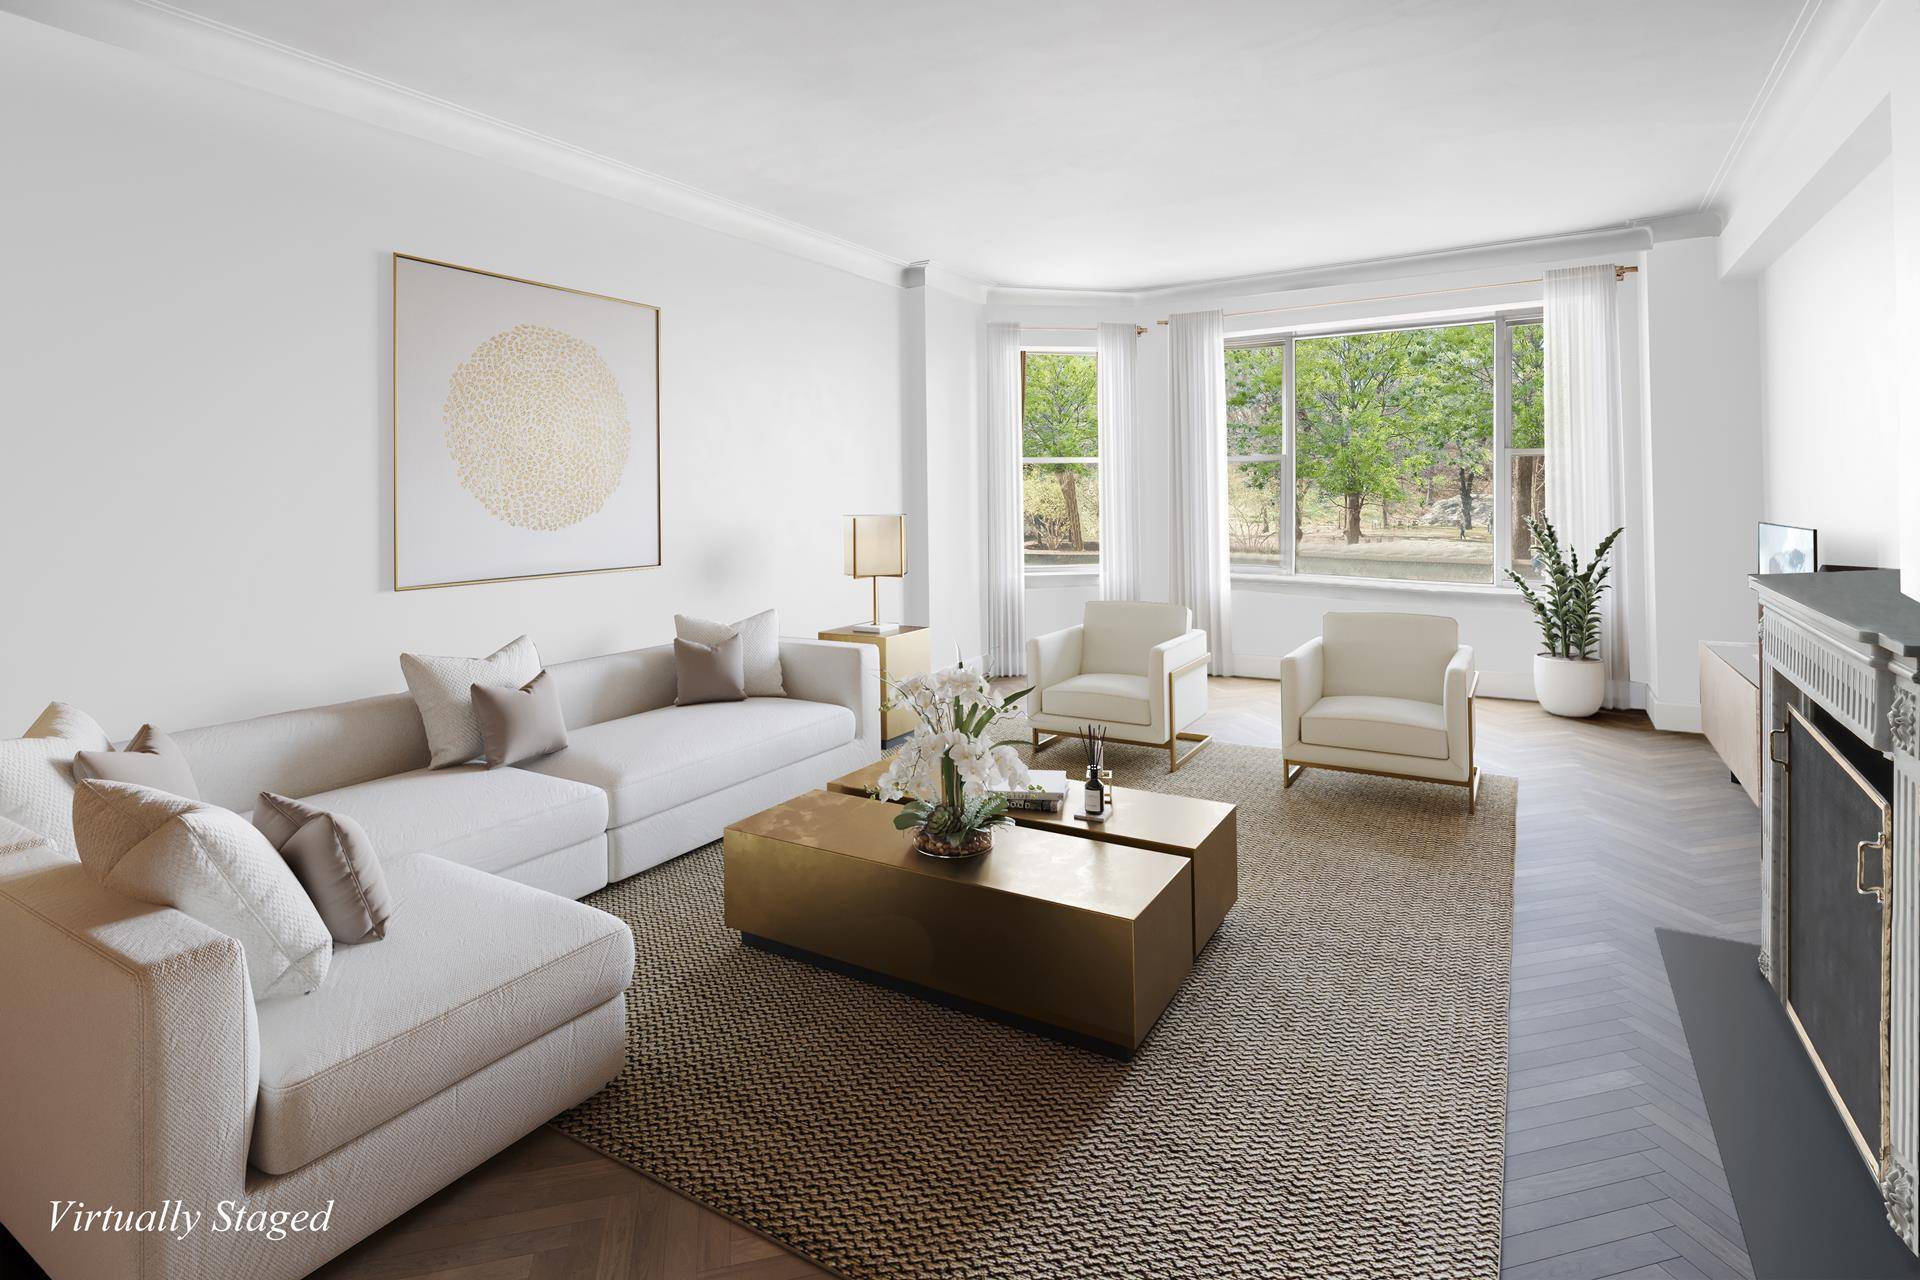 2 Bed Plus Bonus Room Library or Bedroom Central Park ViewsApartment 2A is an expansive exquisitely renovated apartment at the coveted 1 East 66th Street.